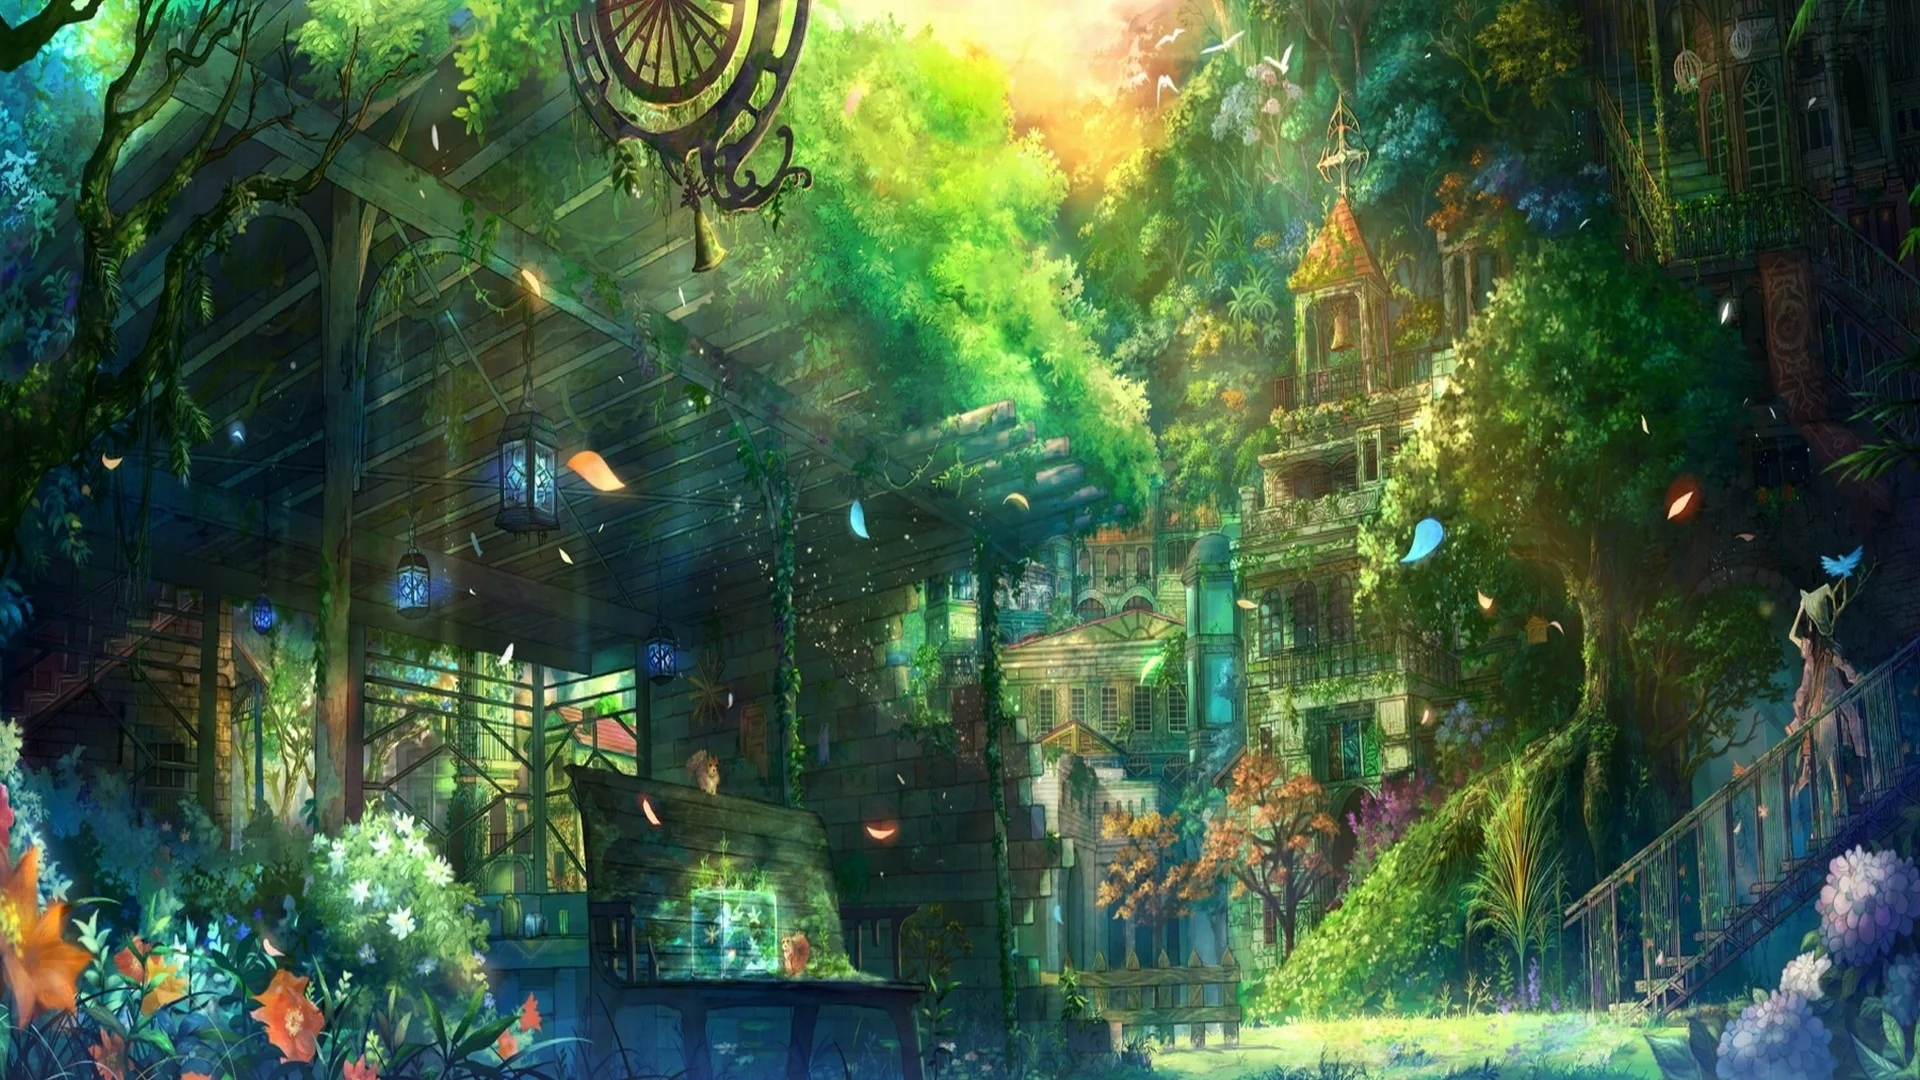 Anime City Scenery Wallpapers High Definition with High Definition Wallpaper  px 1.44 MB